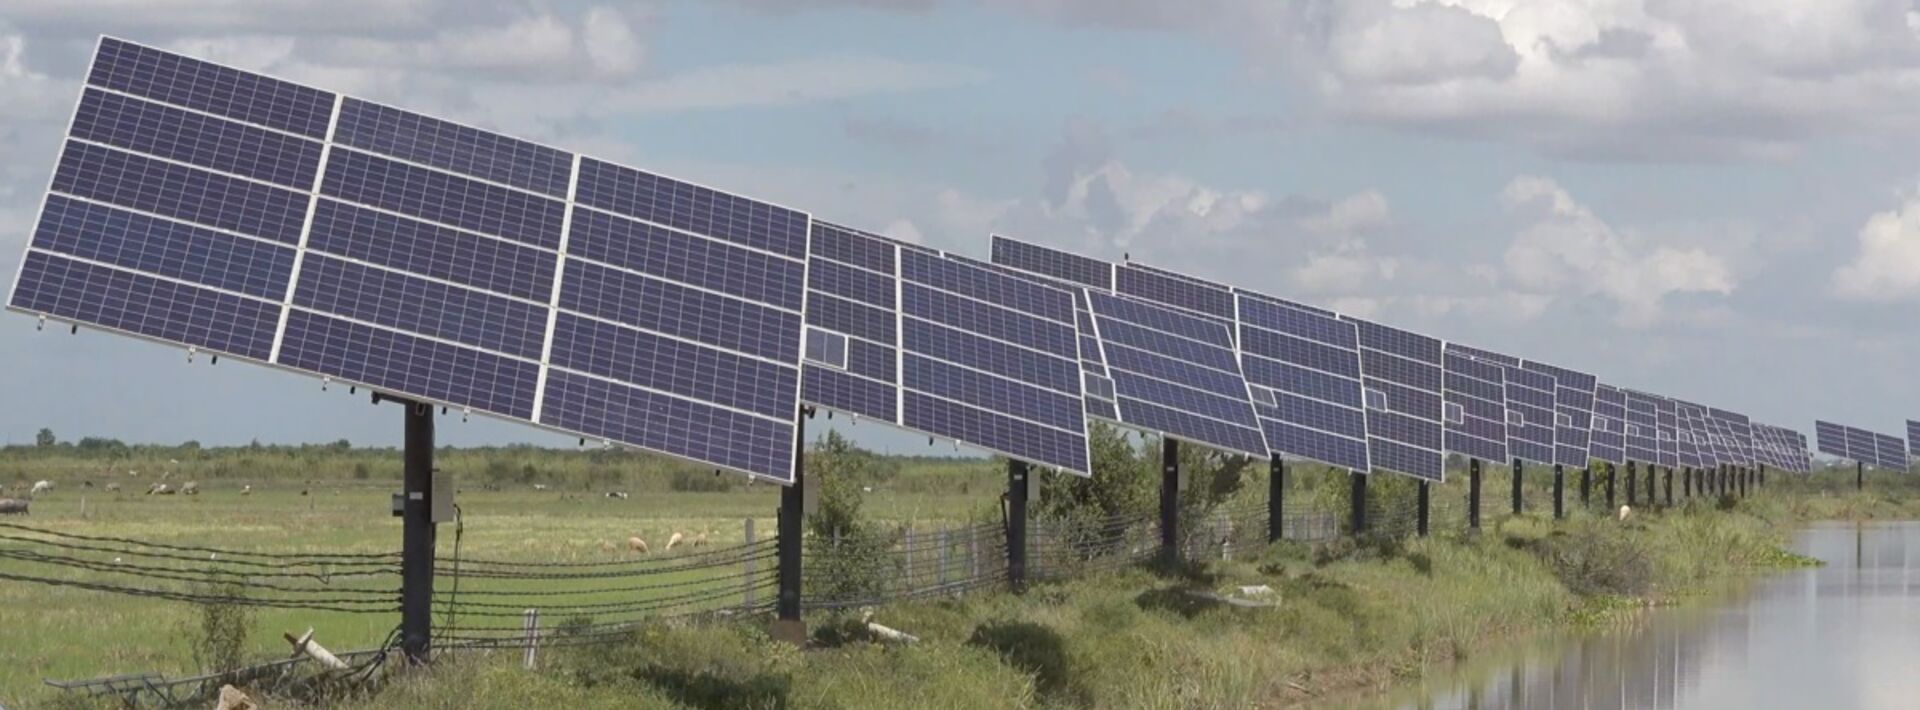 A line of solar panels on a farm situated along a body of water